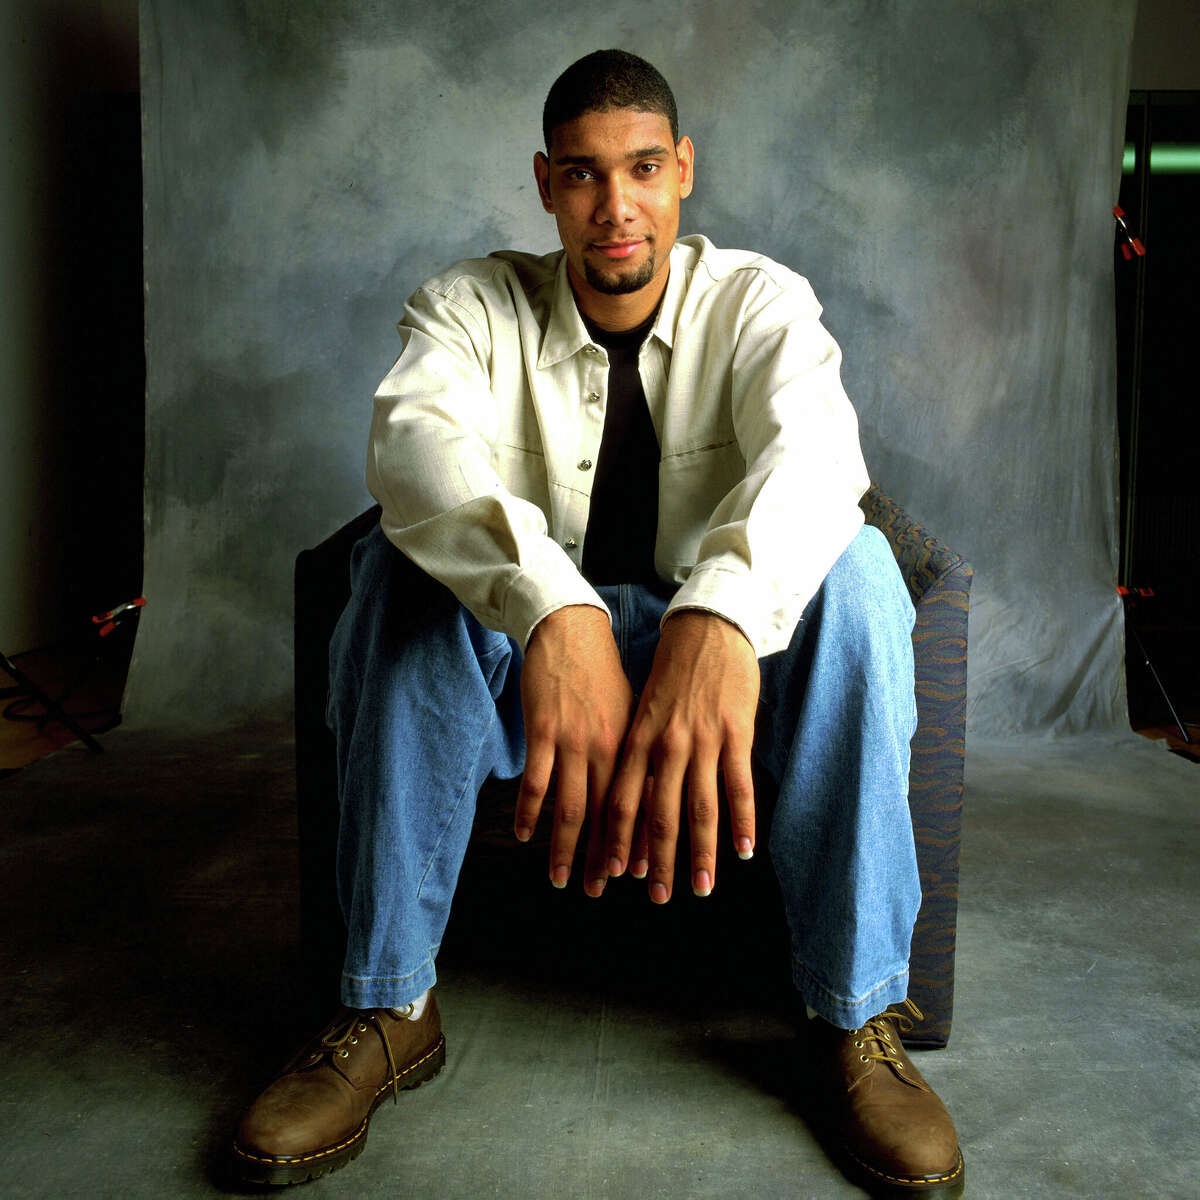 SAN ANTONIO - NOV. 12: Basketball Player Tim Duncan, photographed on November 12, 1998 in Houston, TX. (Photo by Pam Francis/Getty Images)